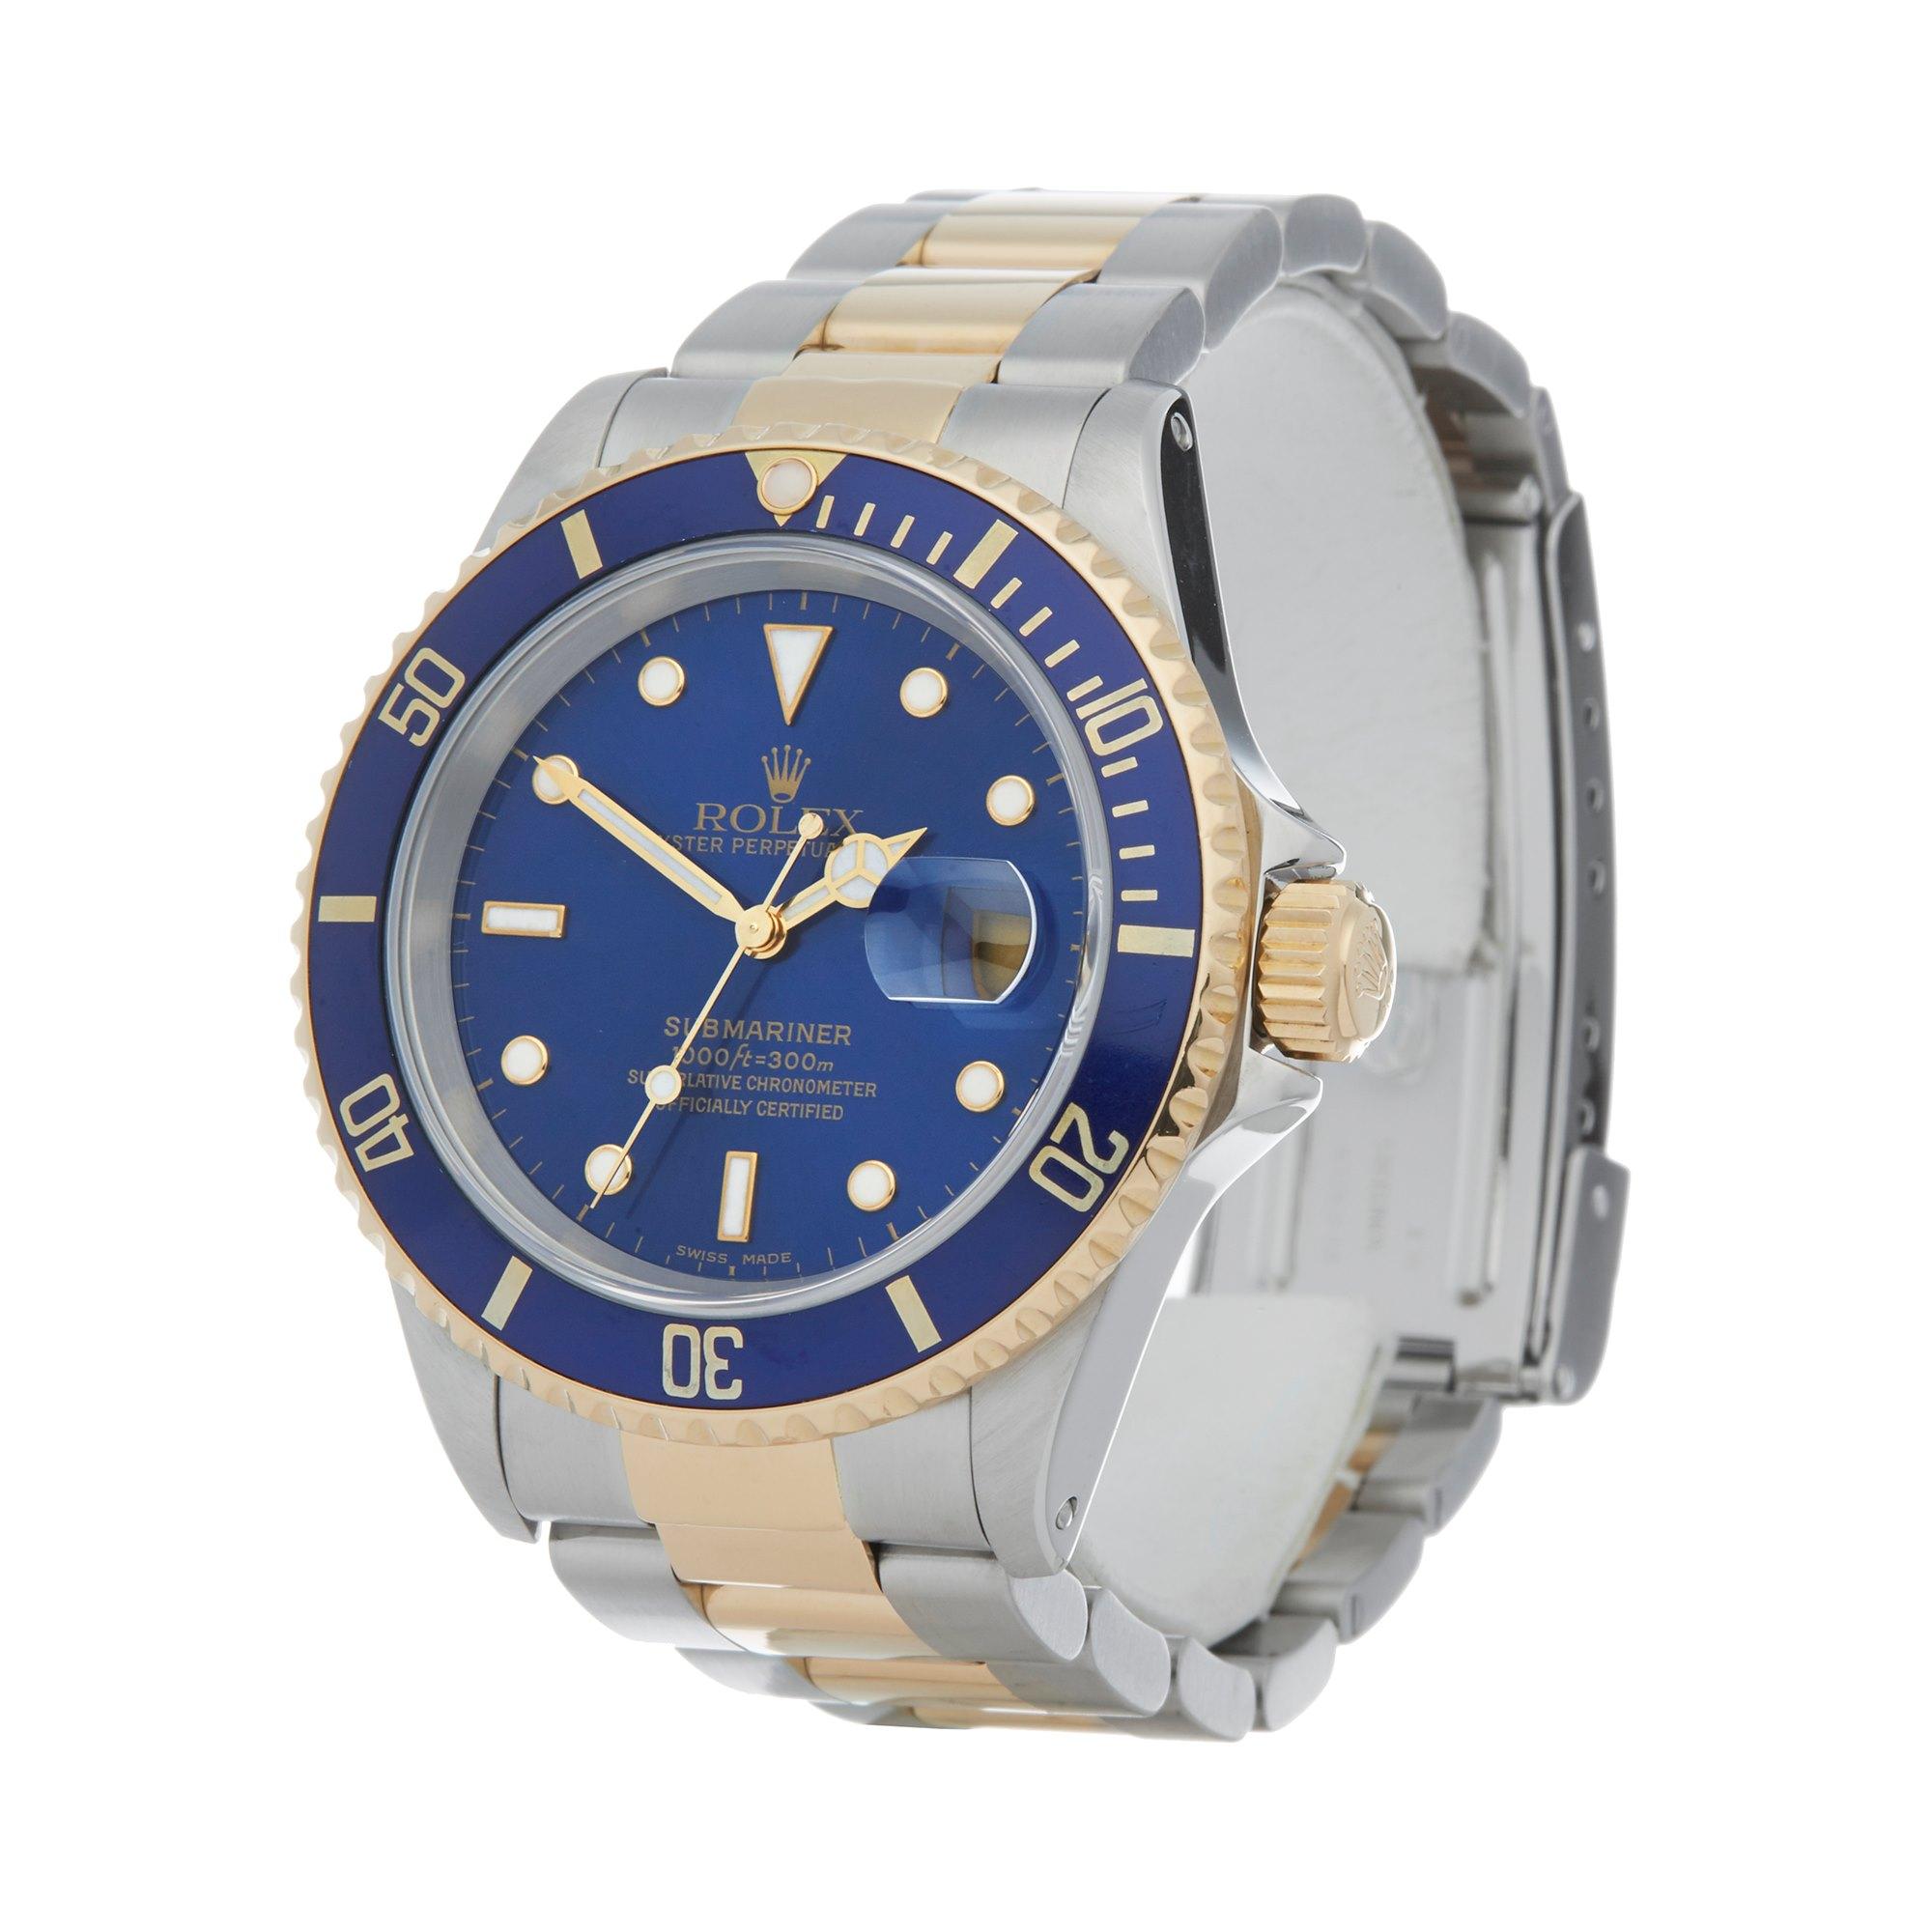 Xupes Reference: W007669
Manufacturer: Rolex
Model: Submariner
Model Variant: Date
Model Number: 16613
Age: 36800
Gender: Men
Complete With: Rolex Box, Manuals, Guarantee, Calendar Card, Card Holder & Swing Tag
Dial: Blue Other
Glass: Sapphire